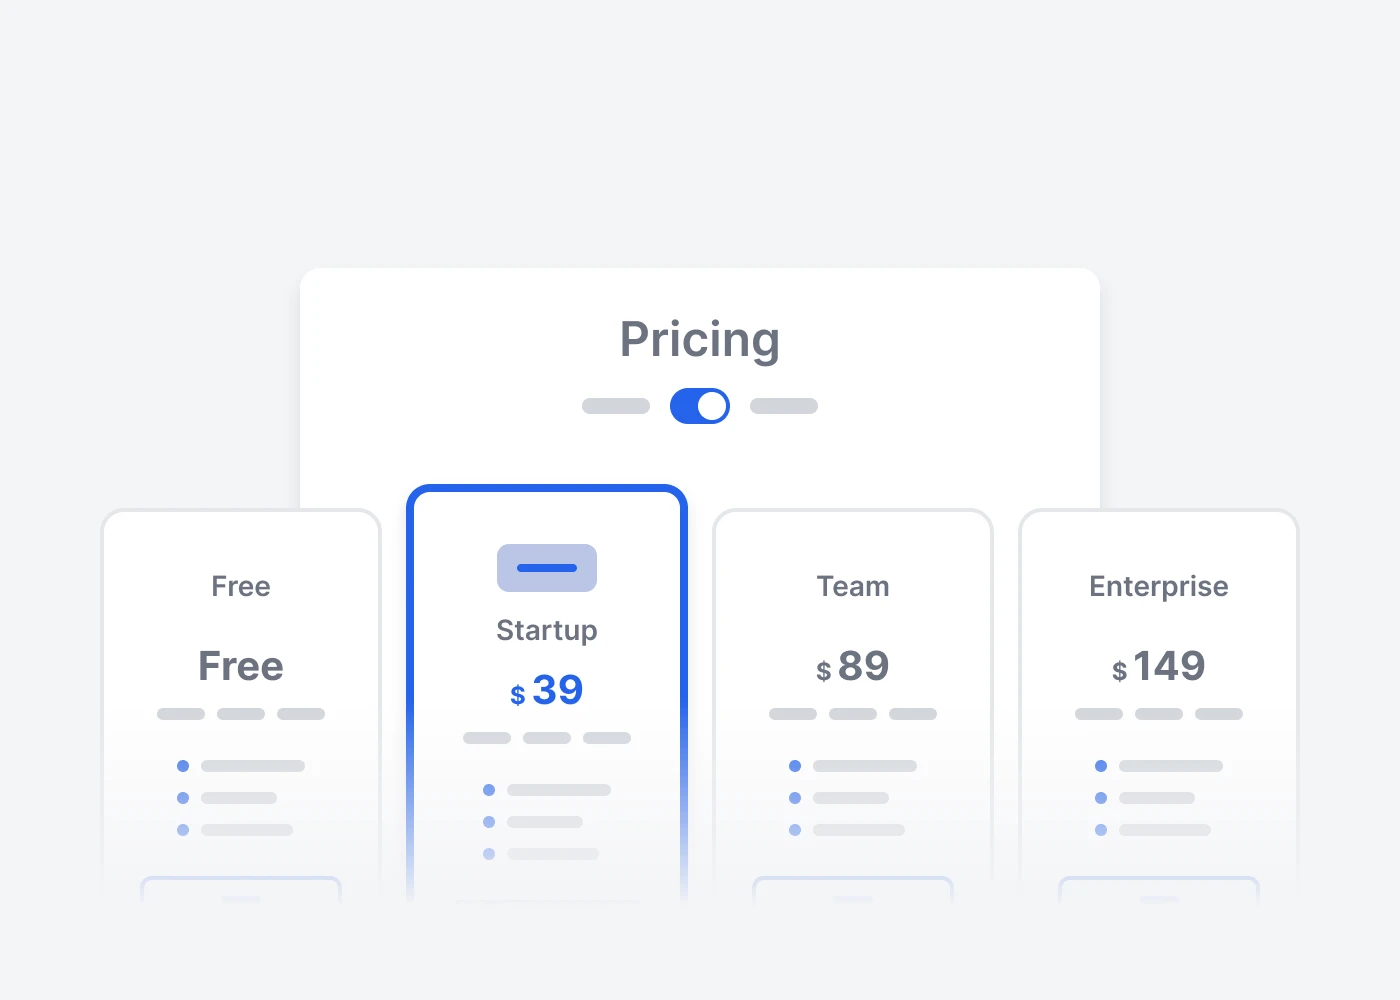 Pricing Sections